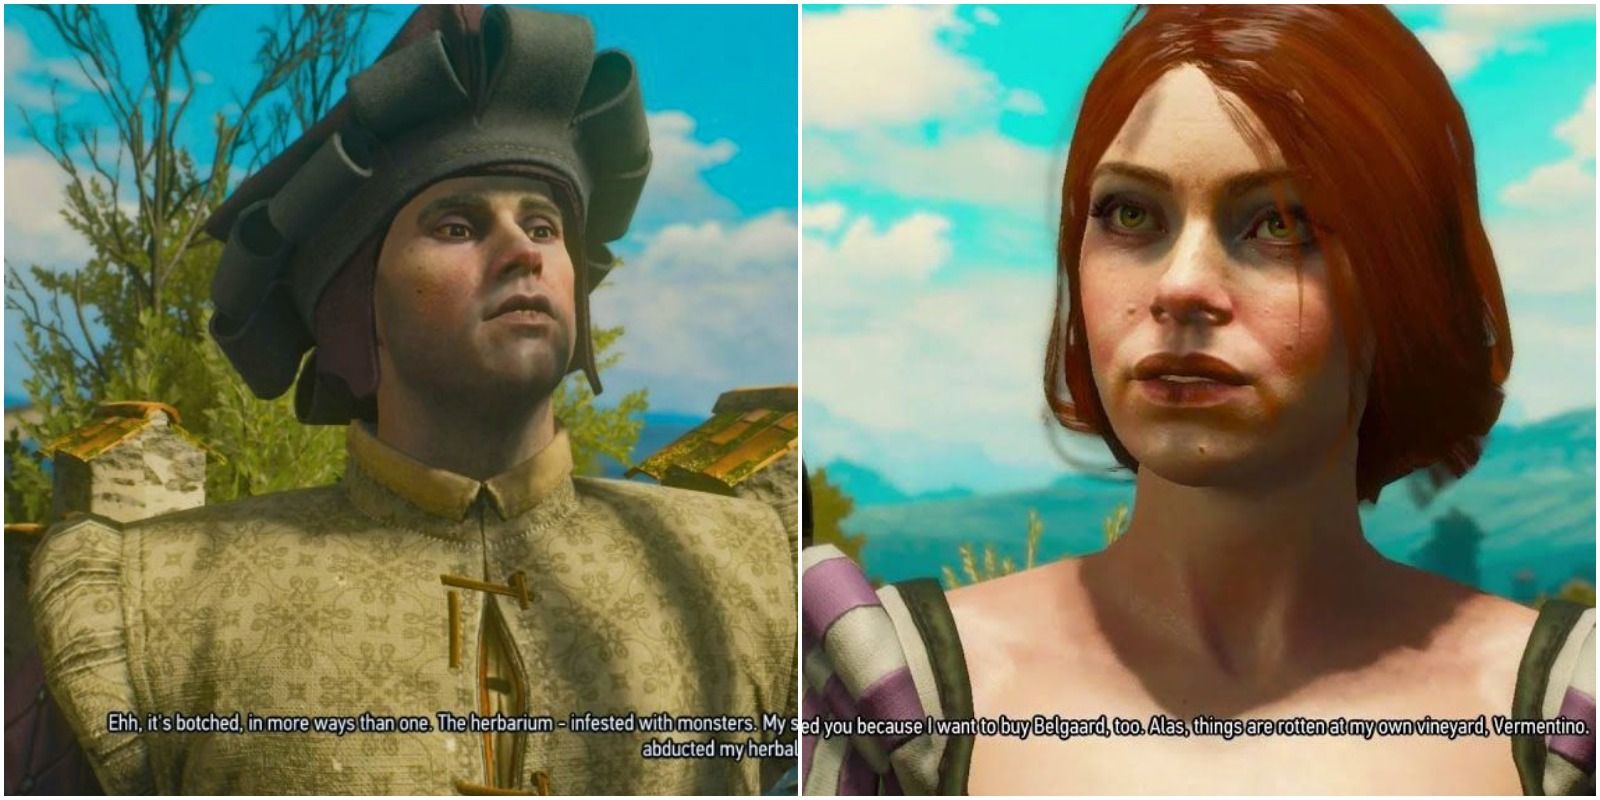 Split image: Liam (left) and Matilda (right) in The Witcher 3